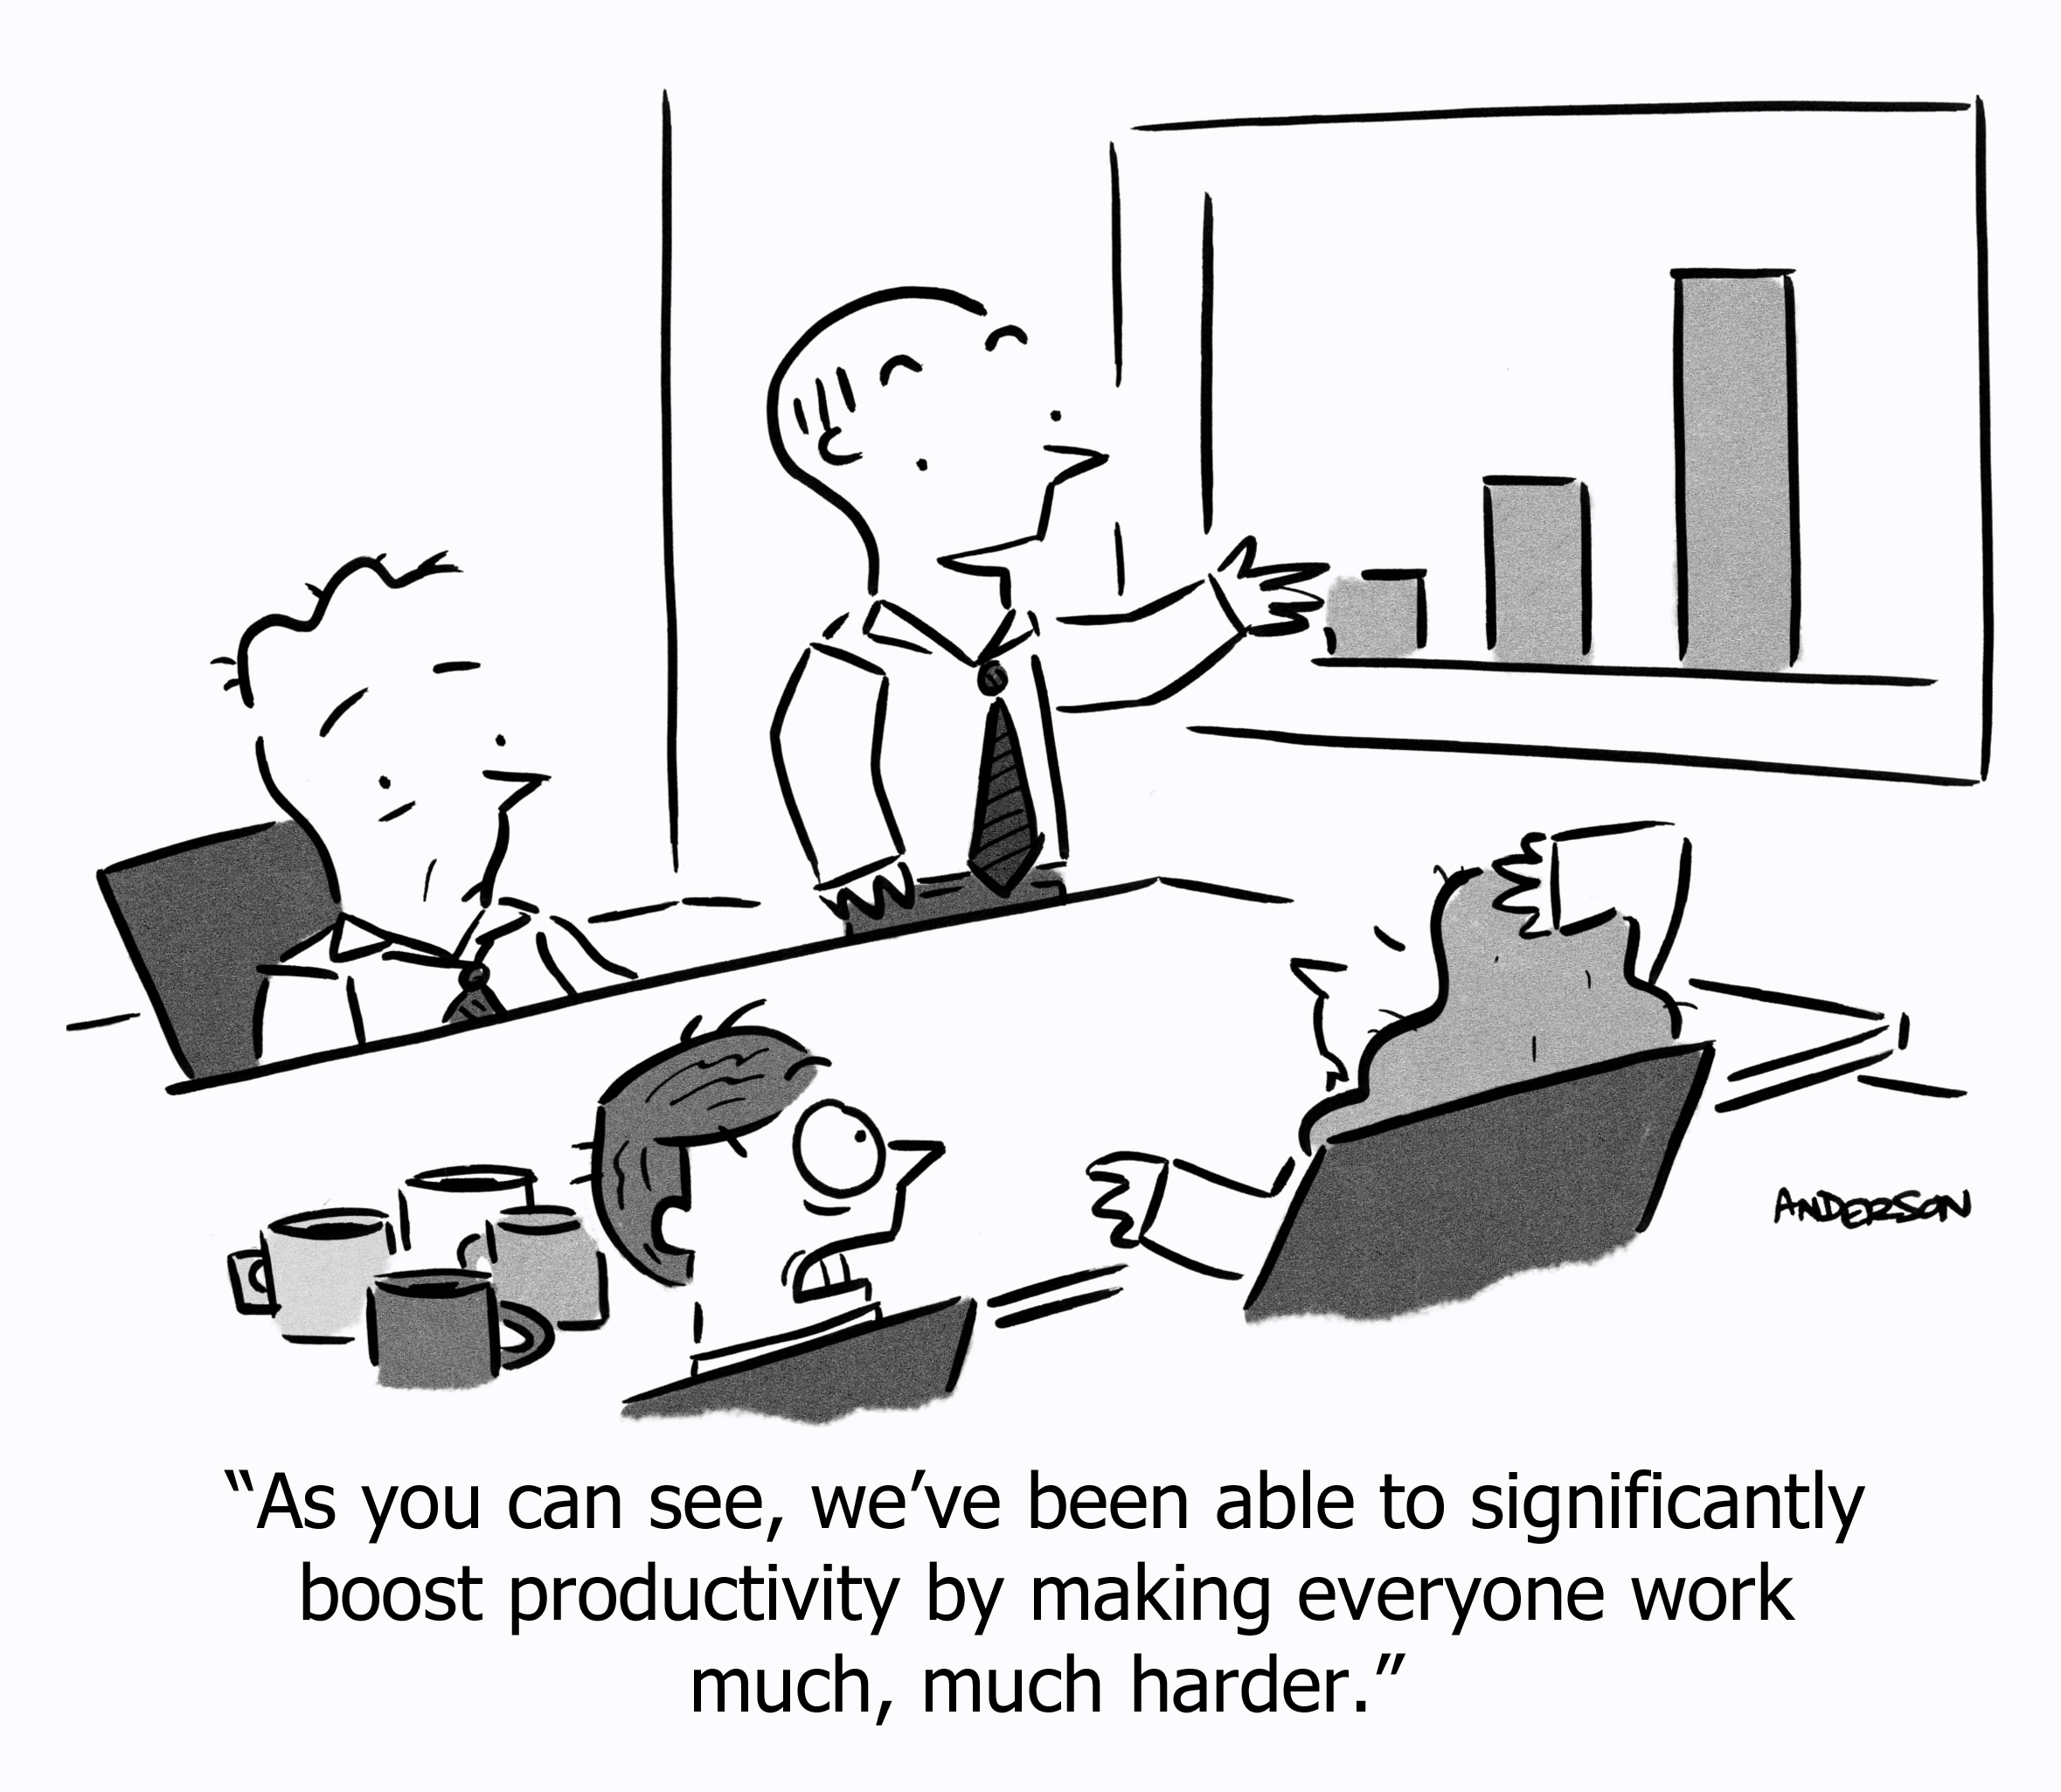 As you can see, we've been able to significantly boost productivity by making everyone work much, much harder.